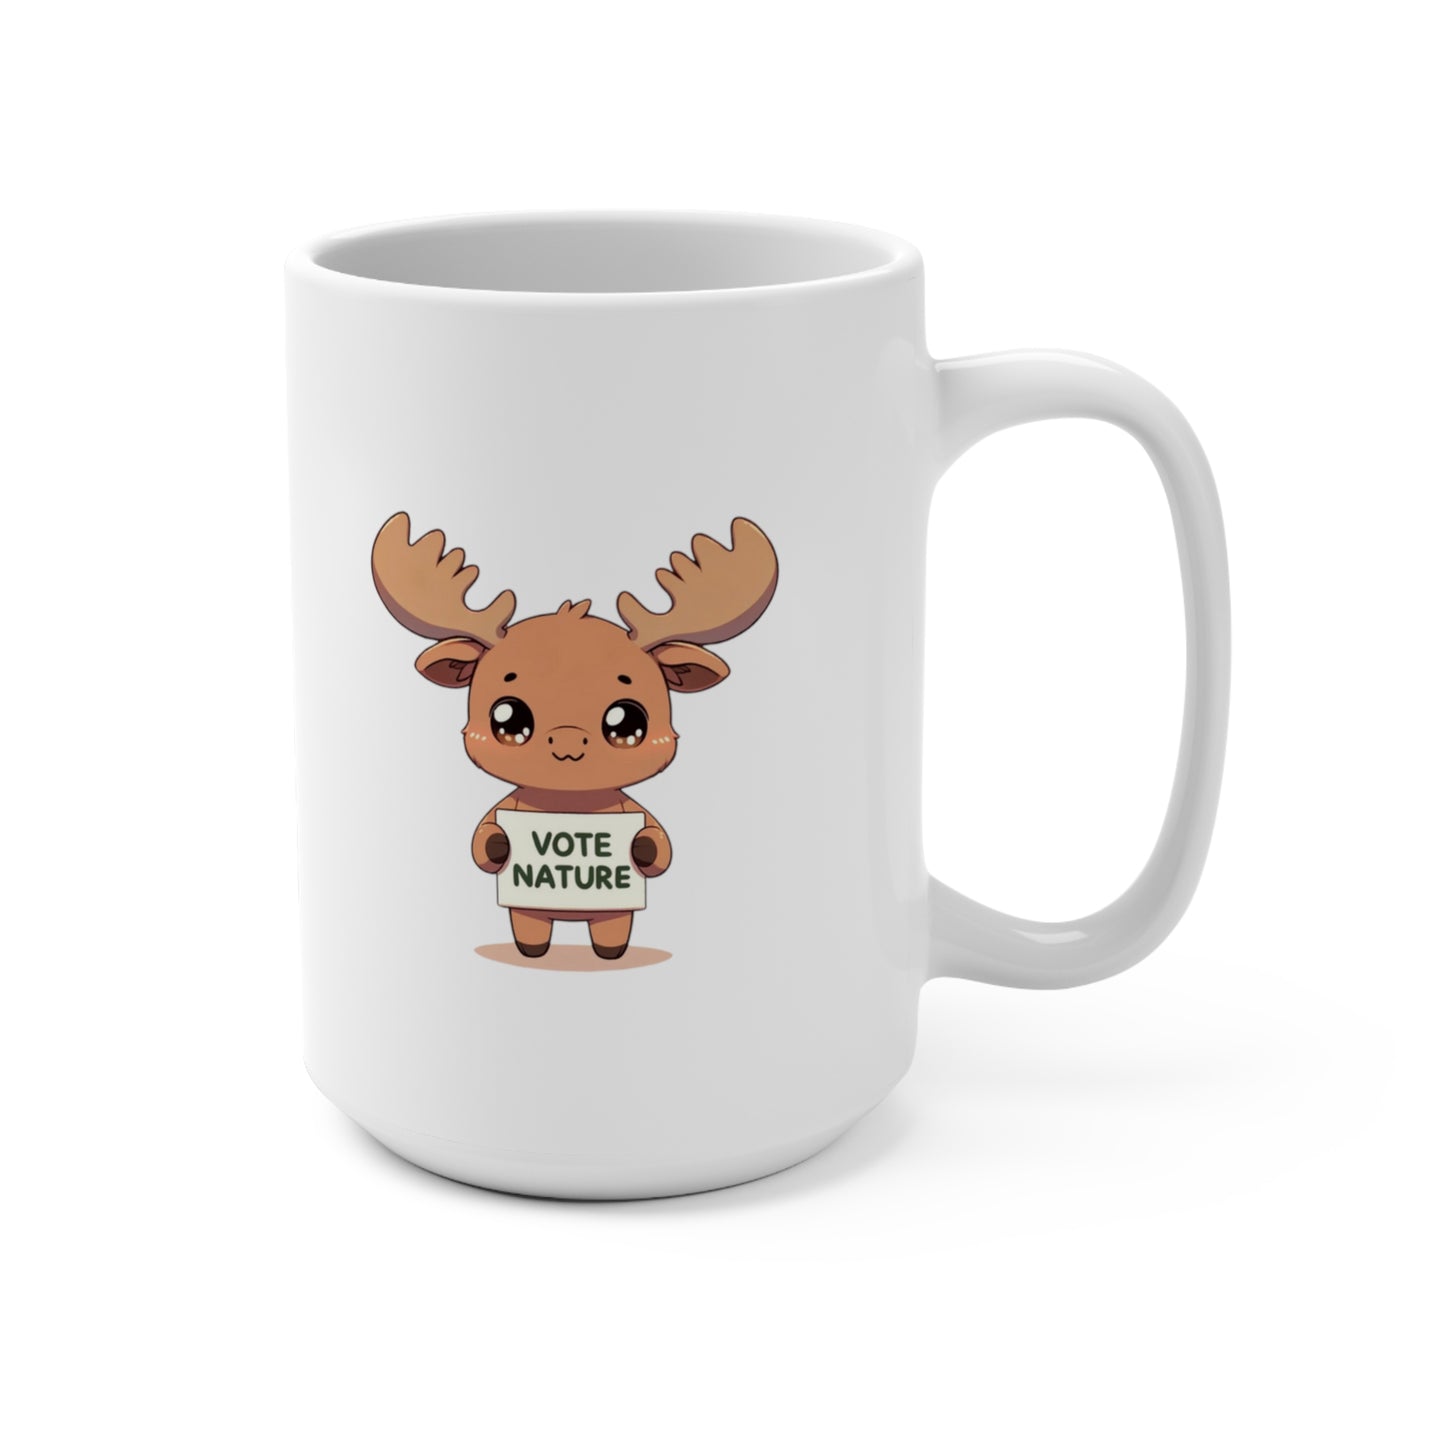 Inspirational Cute Moose Statement Coffee Mug (15oz): Vote Nature! Be a cute activist bunny!